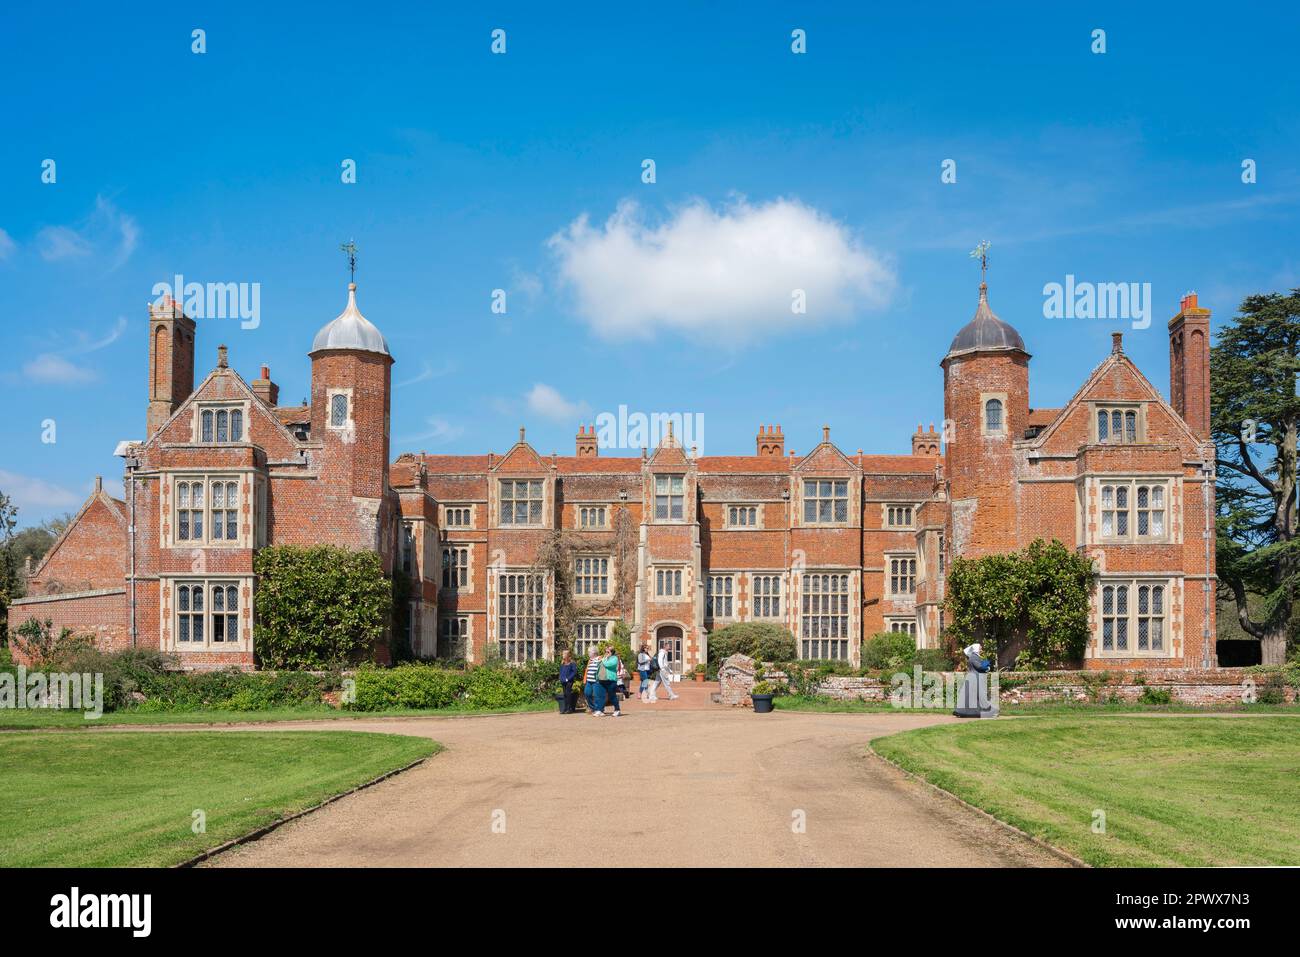 Kentwell Hall Suffolk, view in summer of Kentwell Hall - a well preserved  mid-16th century country house in Long Melford, Suffolk, England, UK Stock Photo